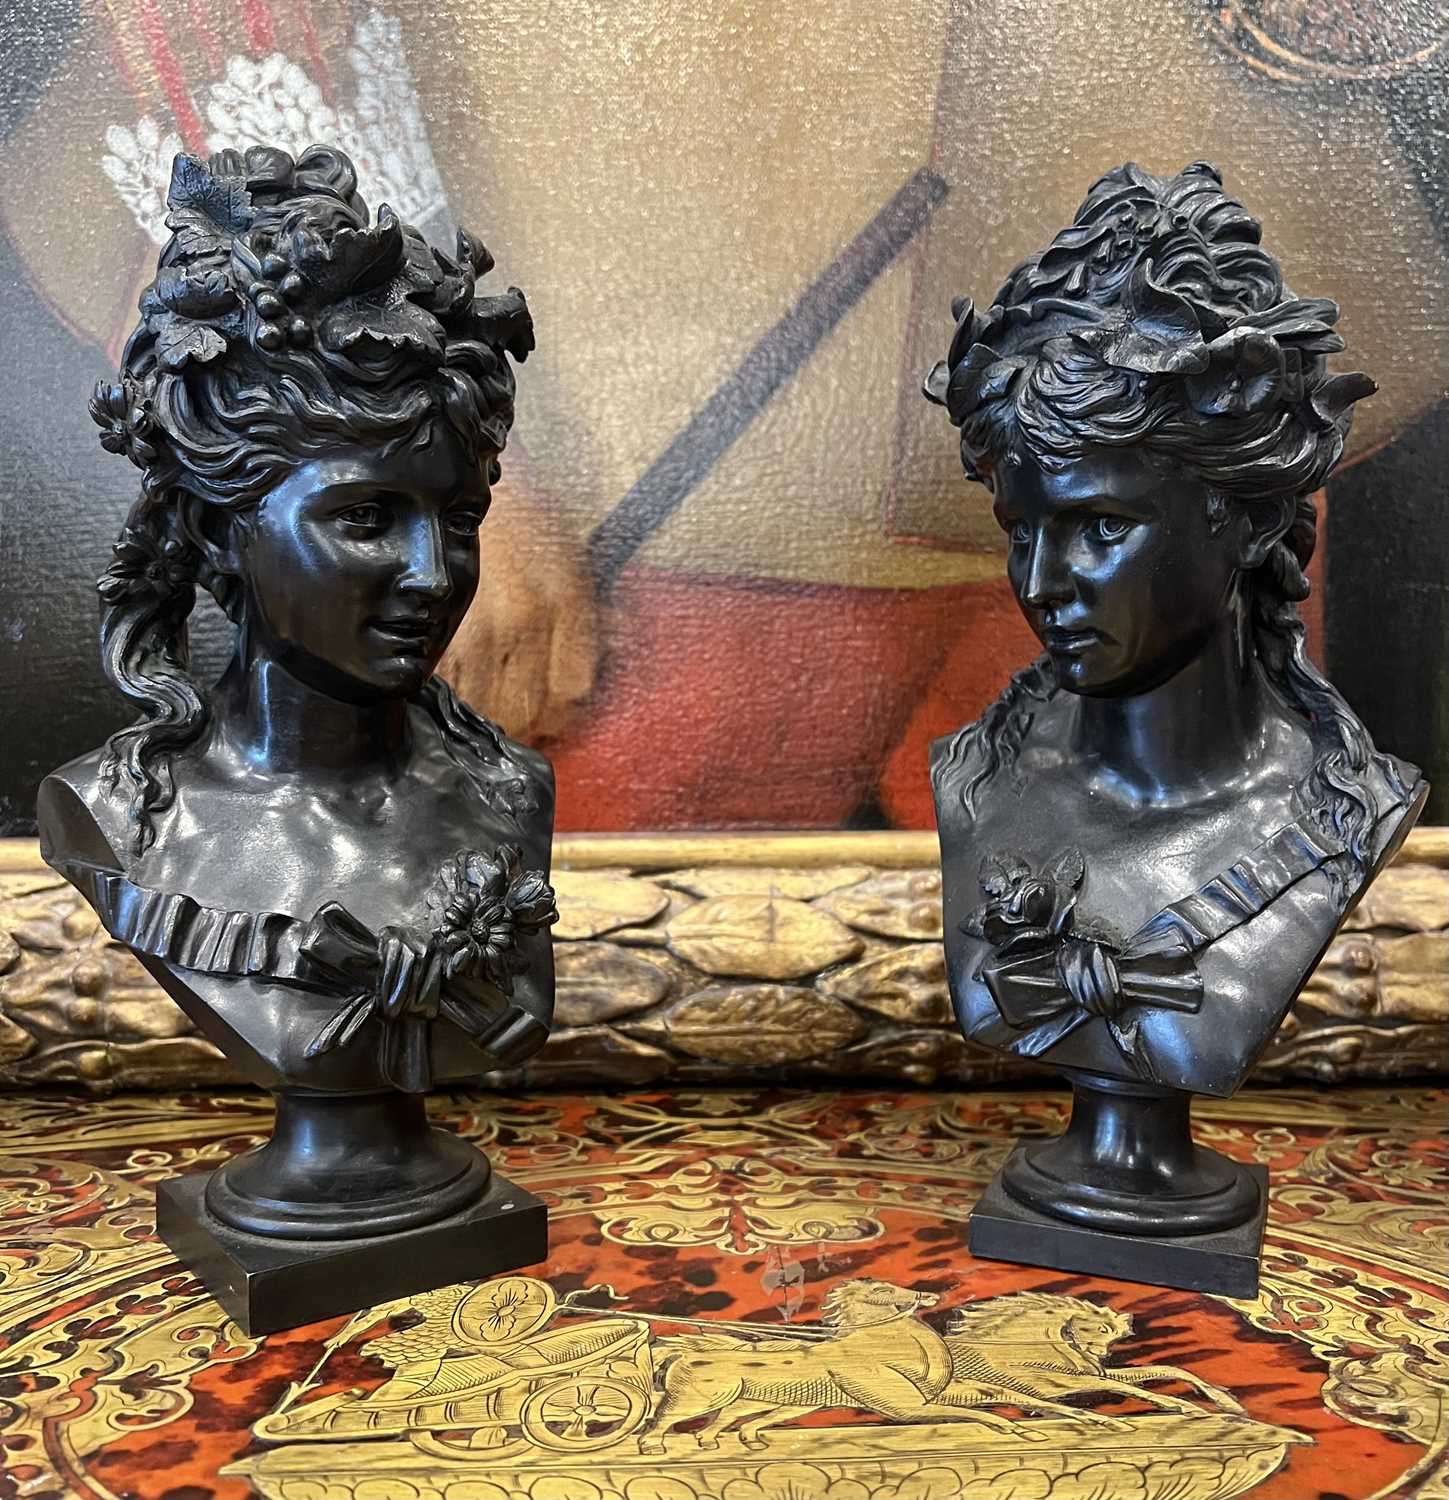 JEAN-LOUIS GRÉGOIRE, (FRENCH, 1840-1890): A PAIR OF BRONZE BUSTS OF MAIDENS - Image 2 of 5